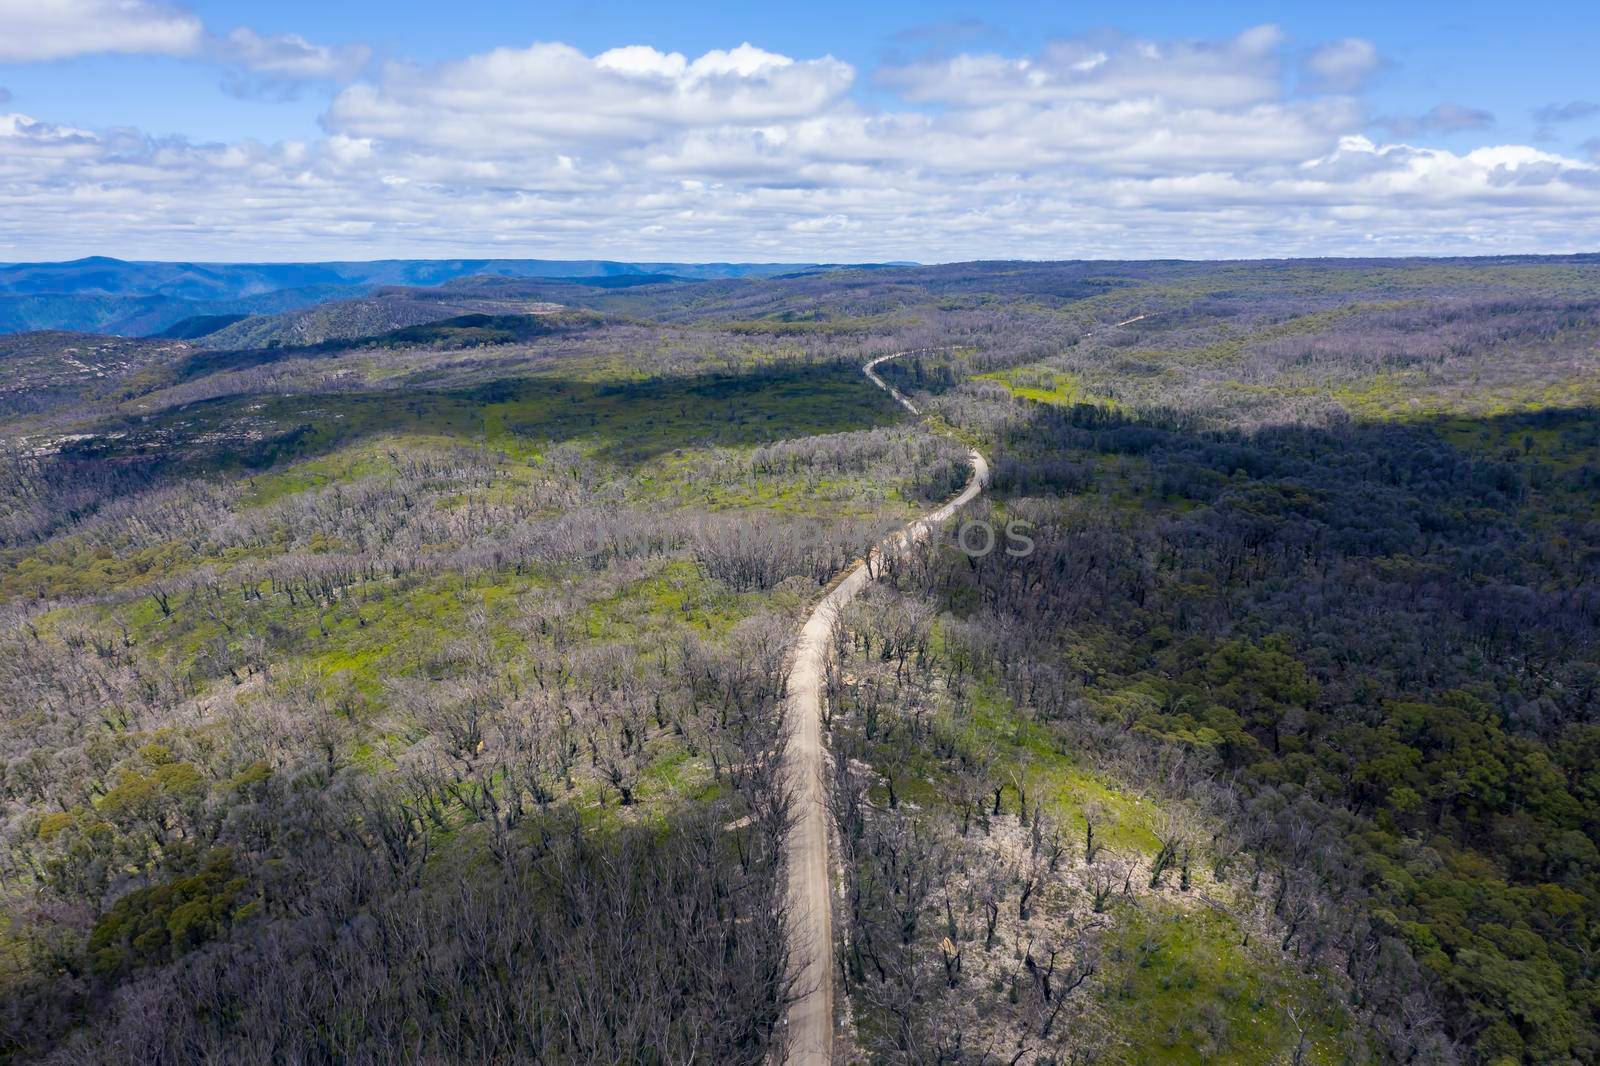 Aerial view of a dirt road in a forest regenerating from bushfire in regional Australia by WittkePhotos